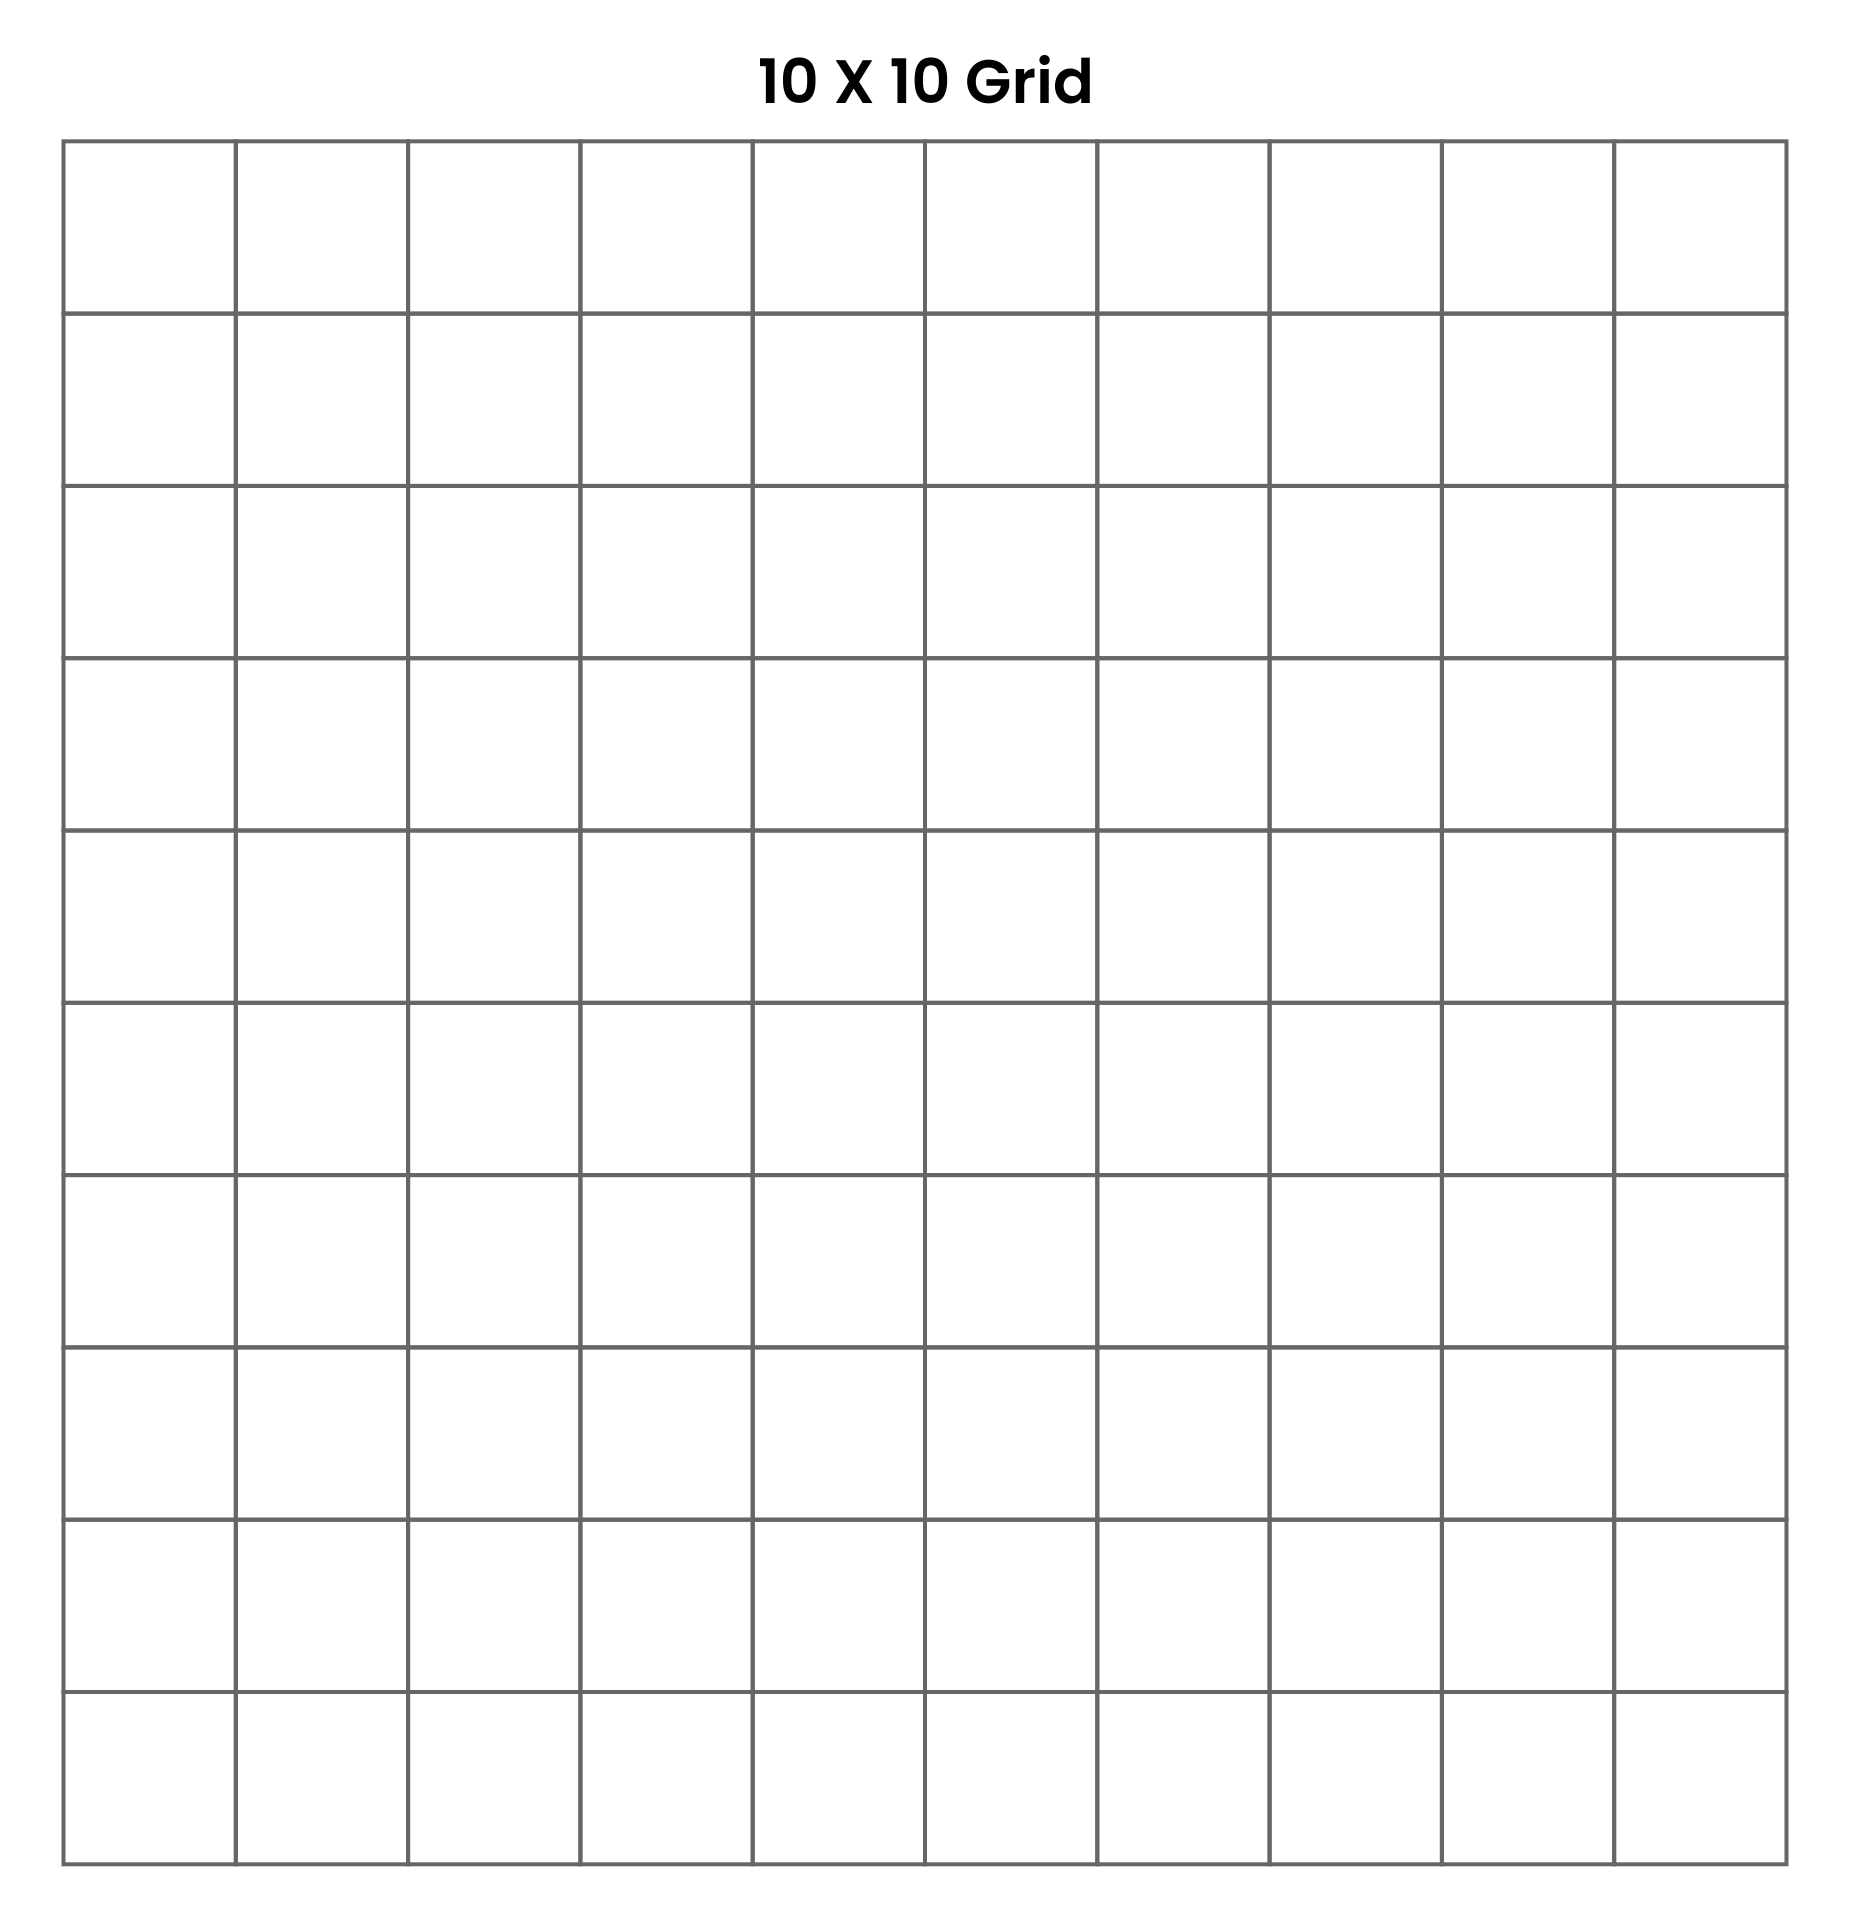 4 Best Images of 10 By 10 Grids Printable Blank 100 Square Grid Paper